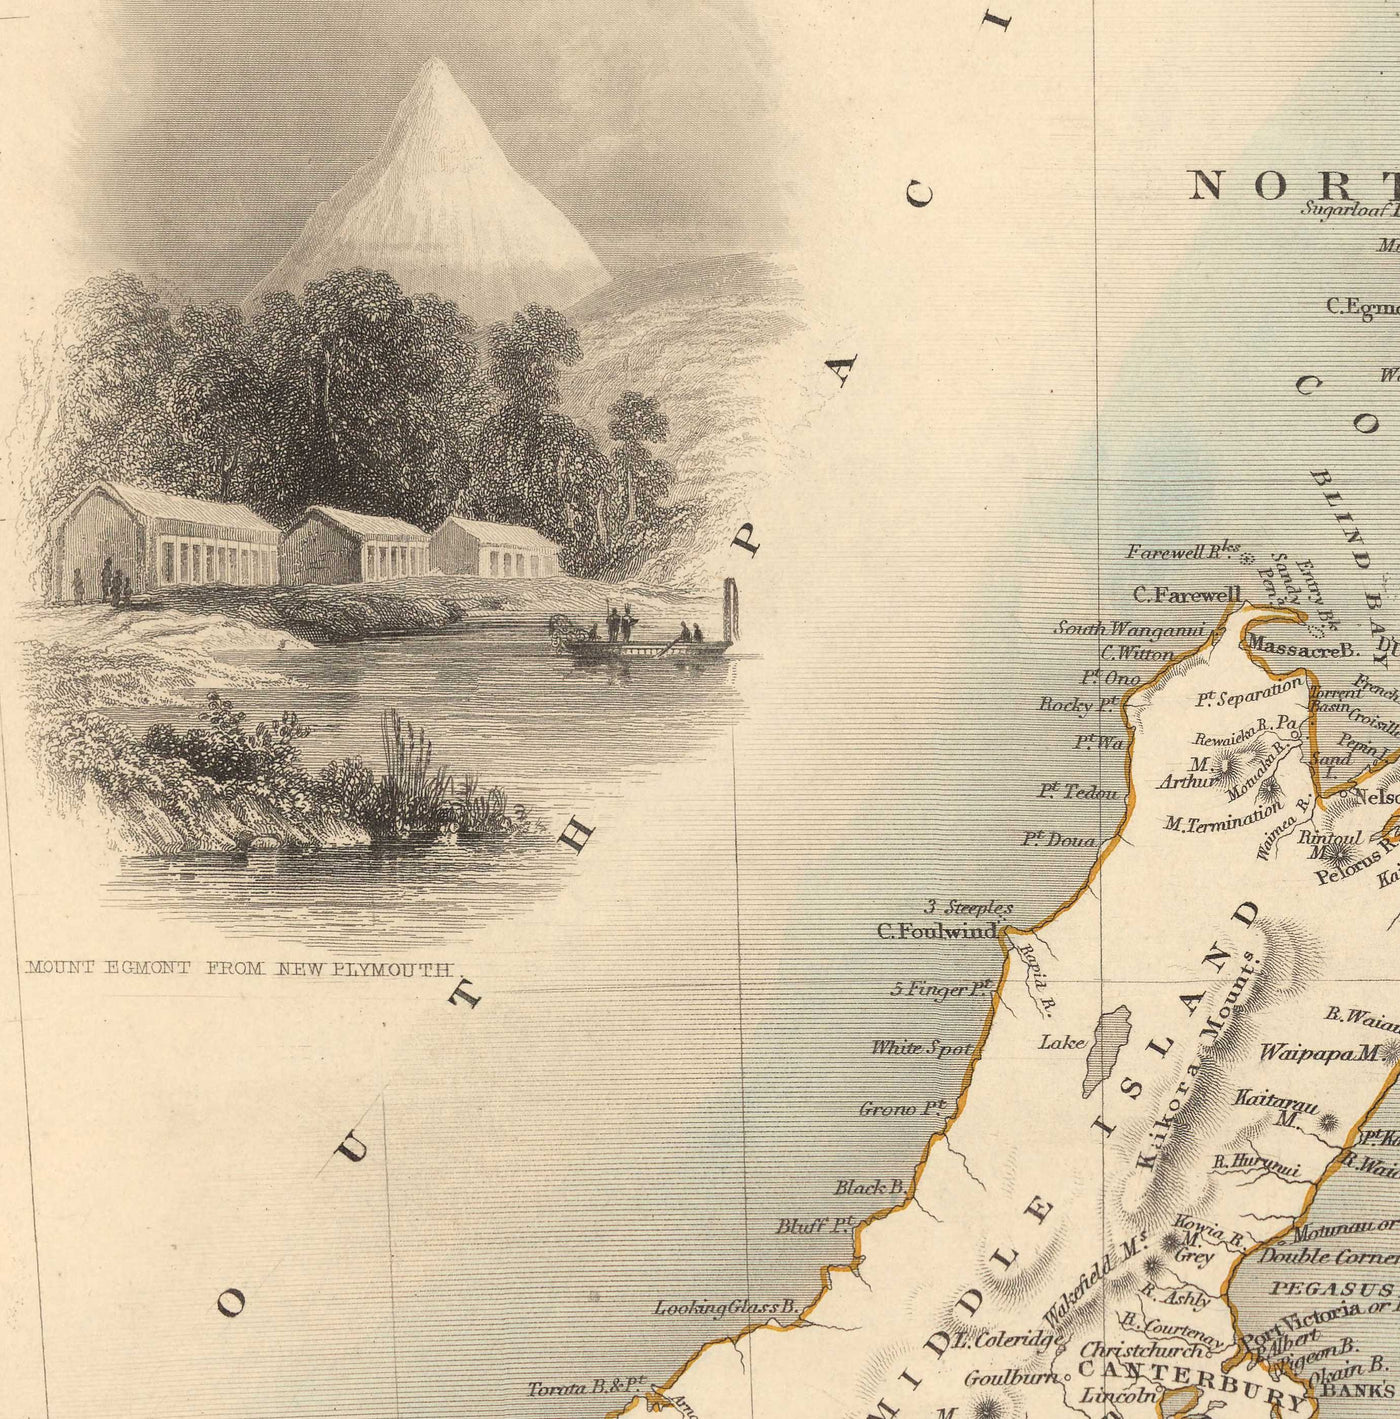 Old Map of New Zealand in 1851 by Tallis and Rapkin - Auckland, Tauranga, Christchurch, Wellington, New Plymouth